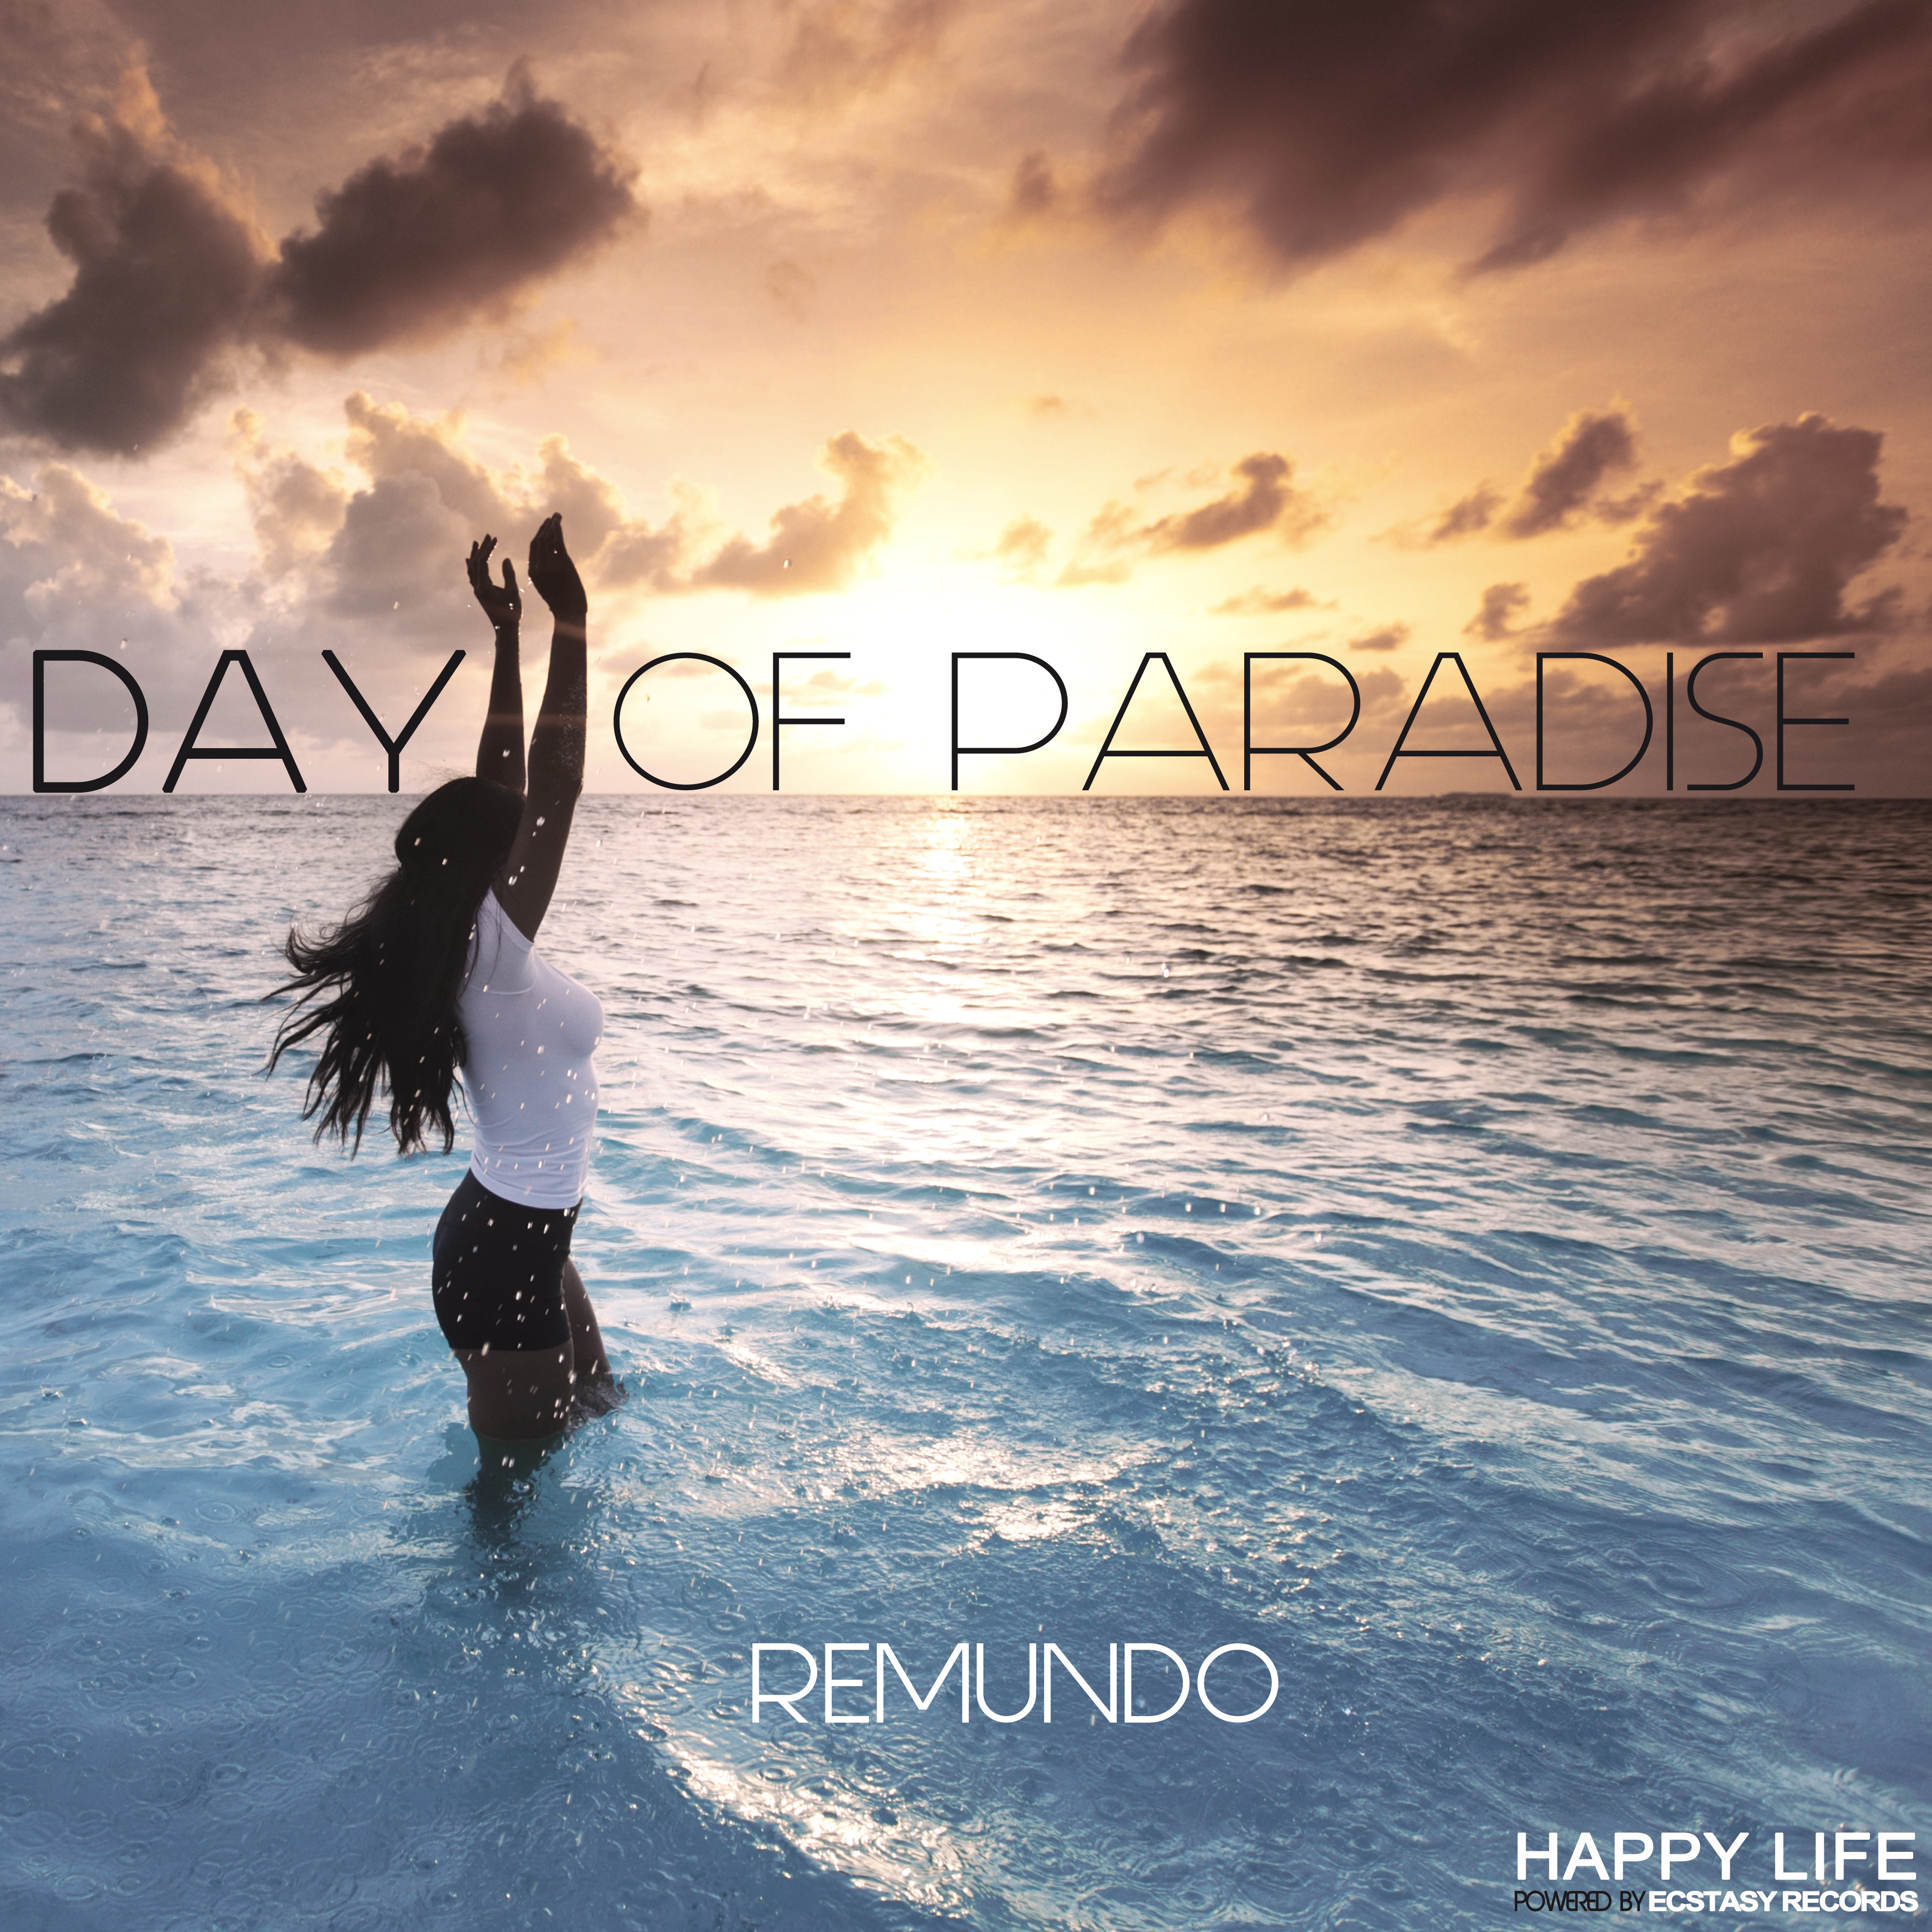 Day of Paradise